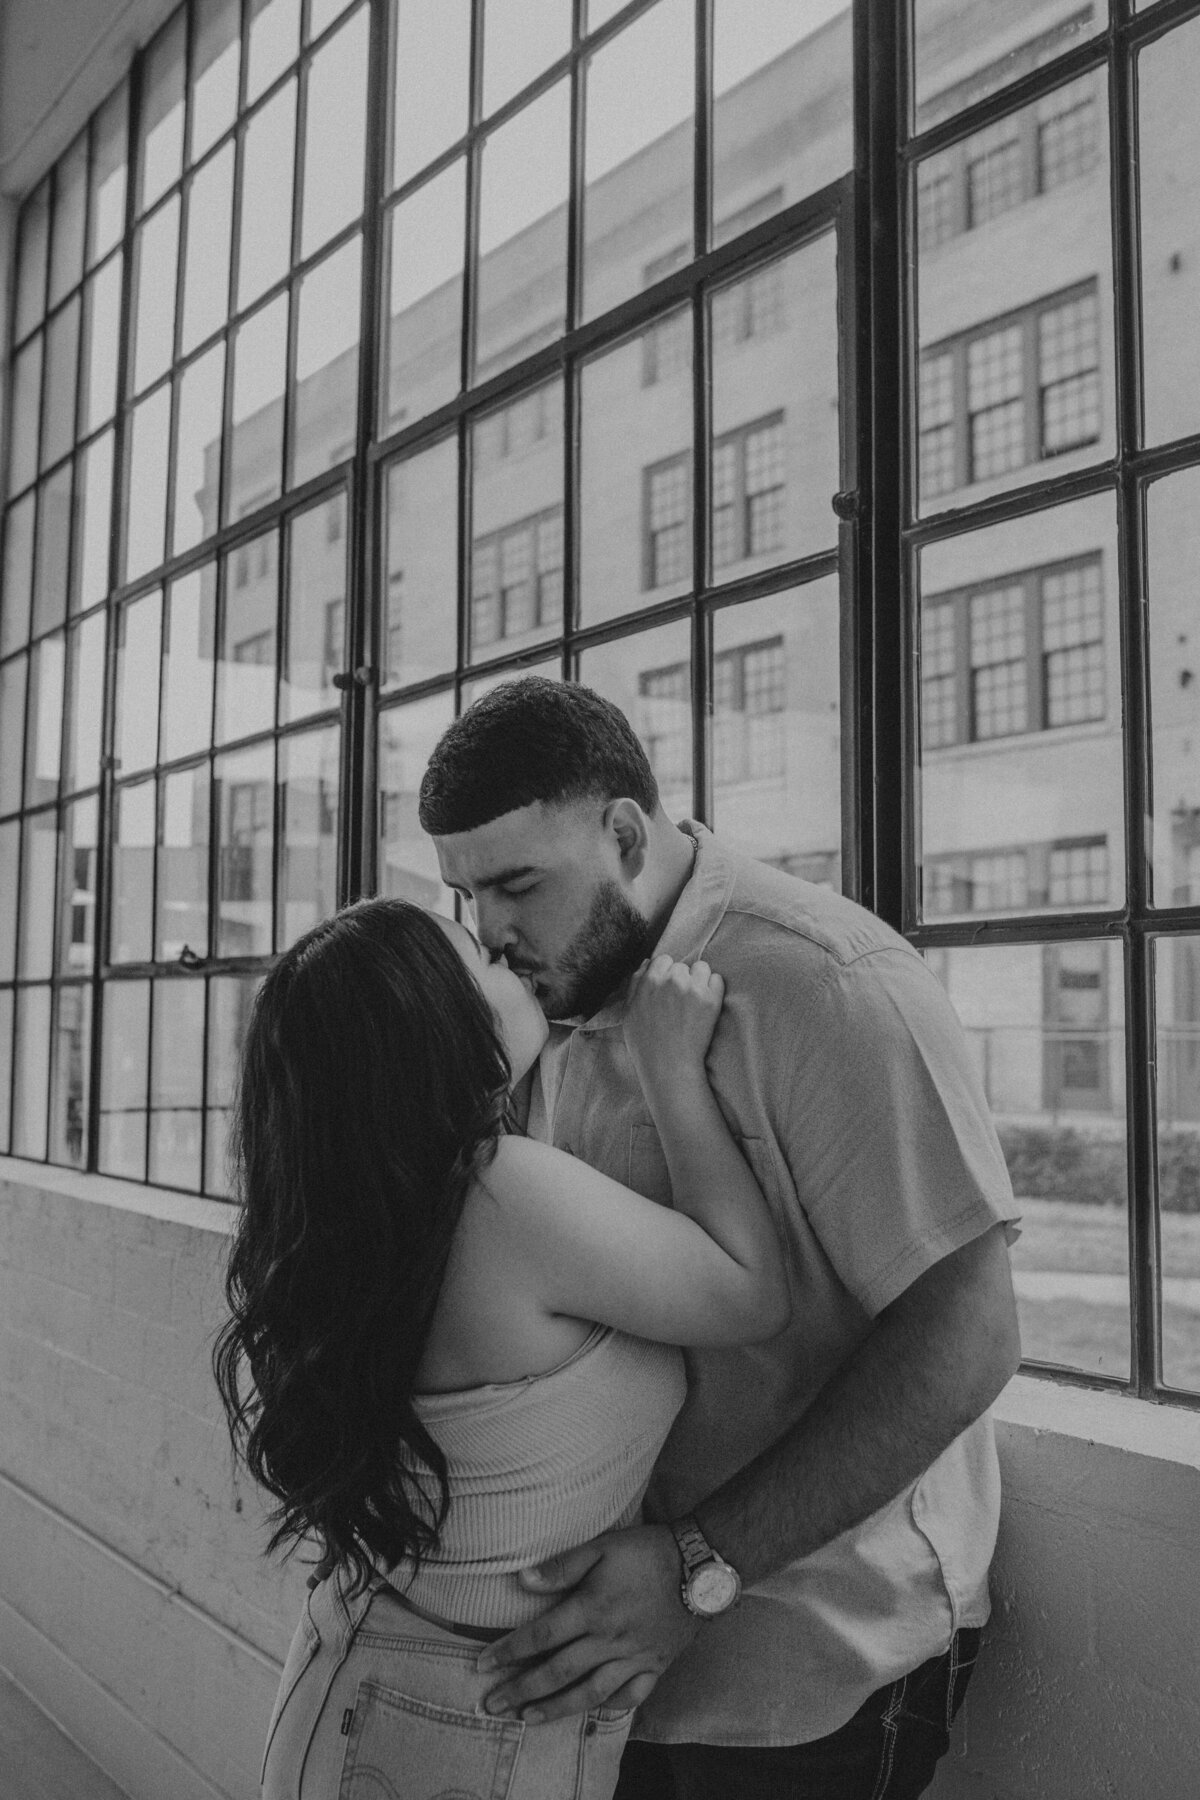 As a wedding photographer documenting an engagement photoshoot near downtown Houston, I was captivated by the studio's loft-like atmosphere, which added an urban edge to the session. Against the backdrop of exposed brick walls and industrial fixtures, the couple's love radiated with authenticity and warmth, resulting in photographs that captured the essence of their modern romance.